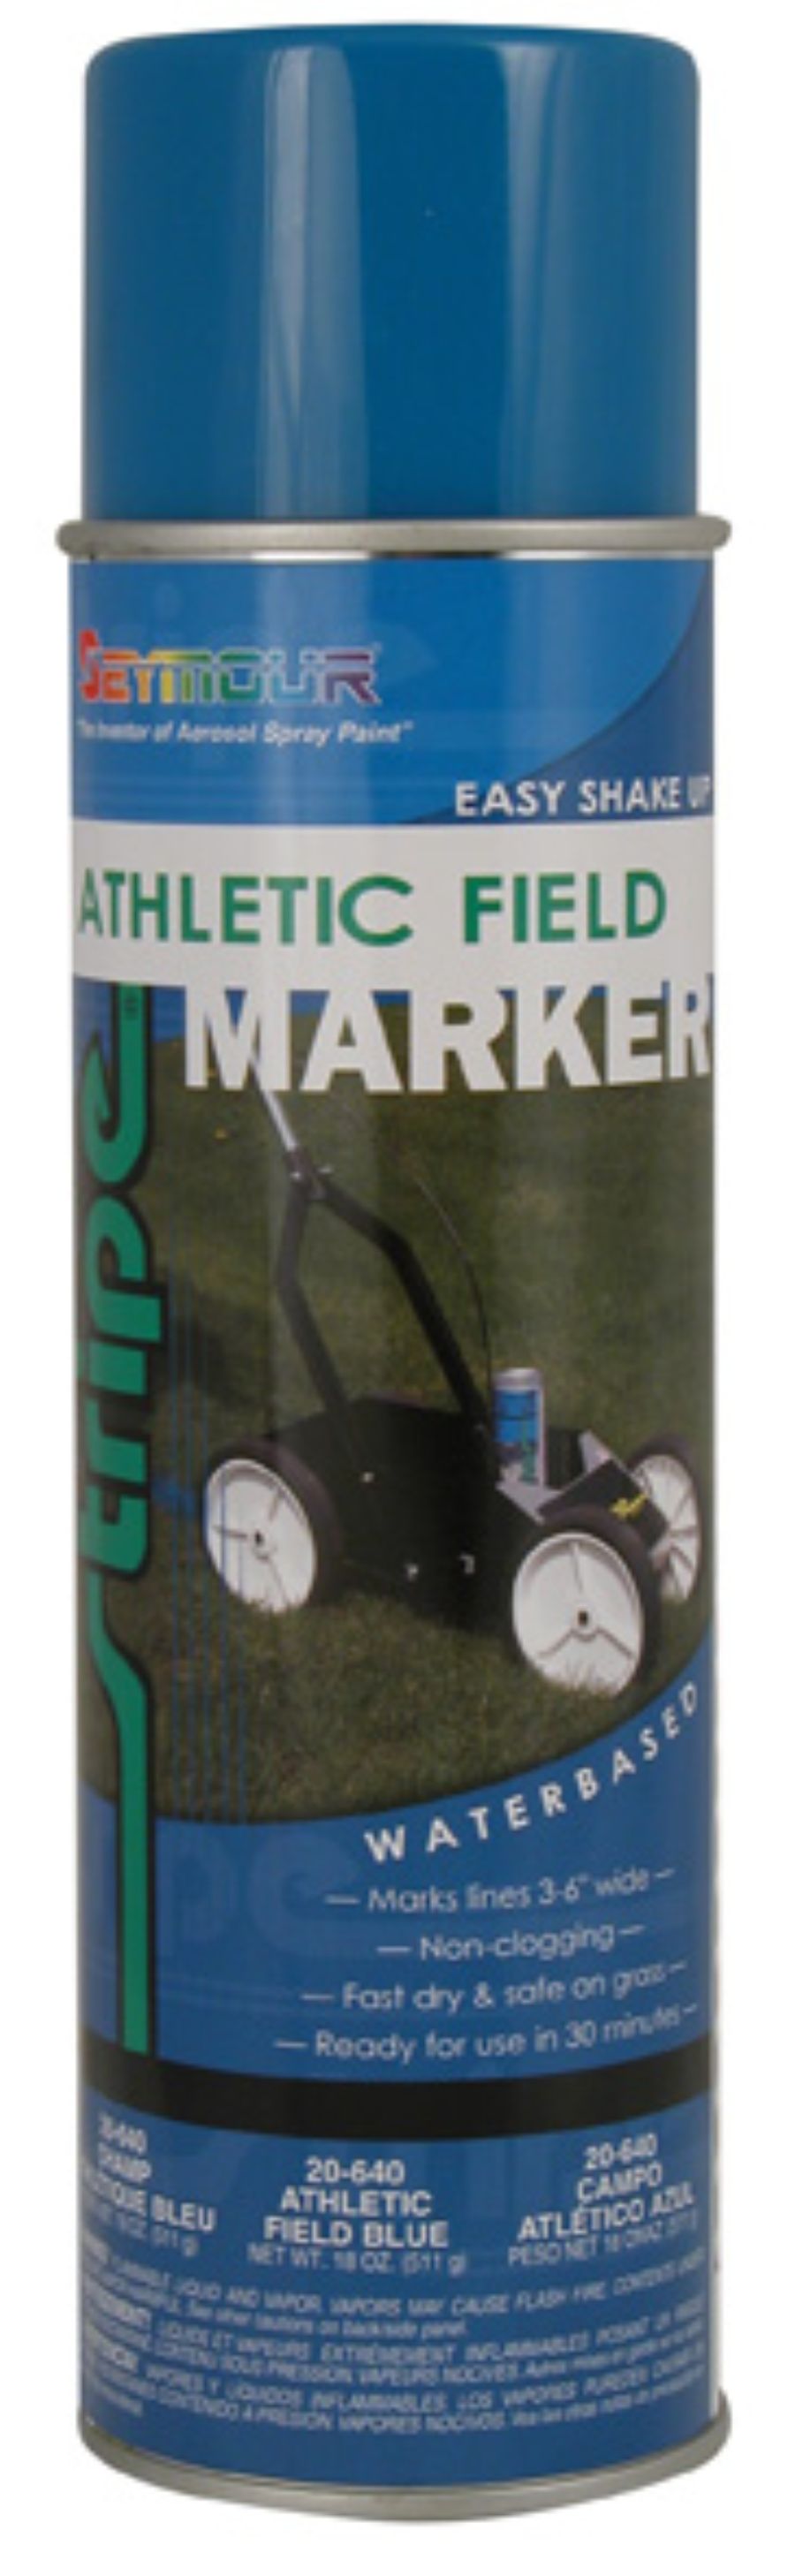 Ameri-Stripe White Athletic Field Marking Spray Paint - 1 Case (12 Cans) 18  oz of Paint per Can 